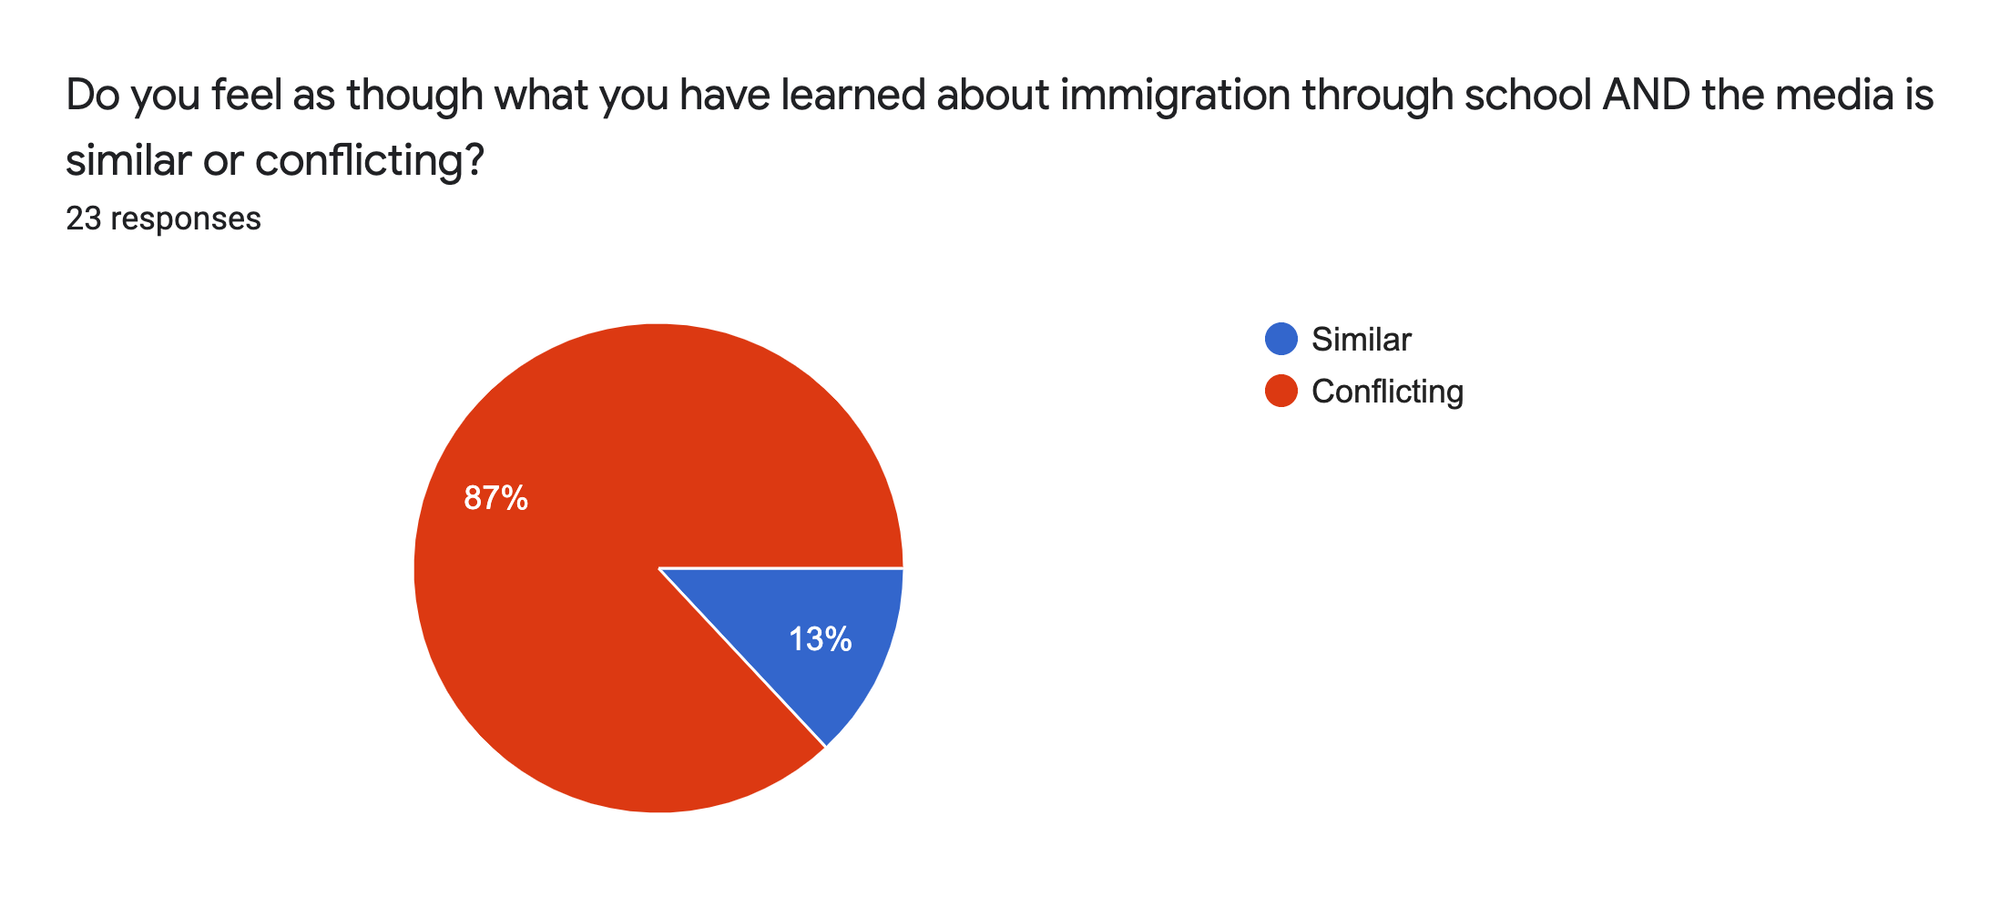 Forms response chart. Question title: Do you feel as though what you have learned about immigration through school AND the media is similar or conflicting?. Number of responses: 23 responses.